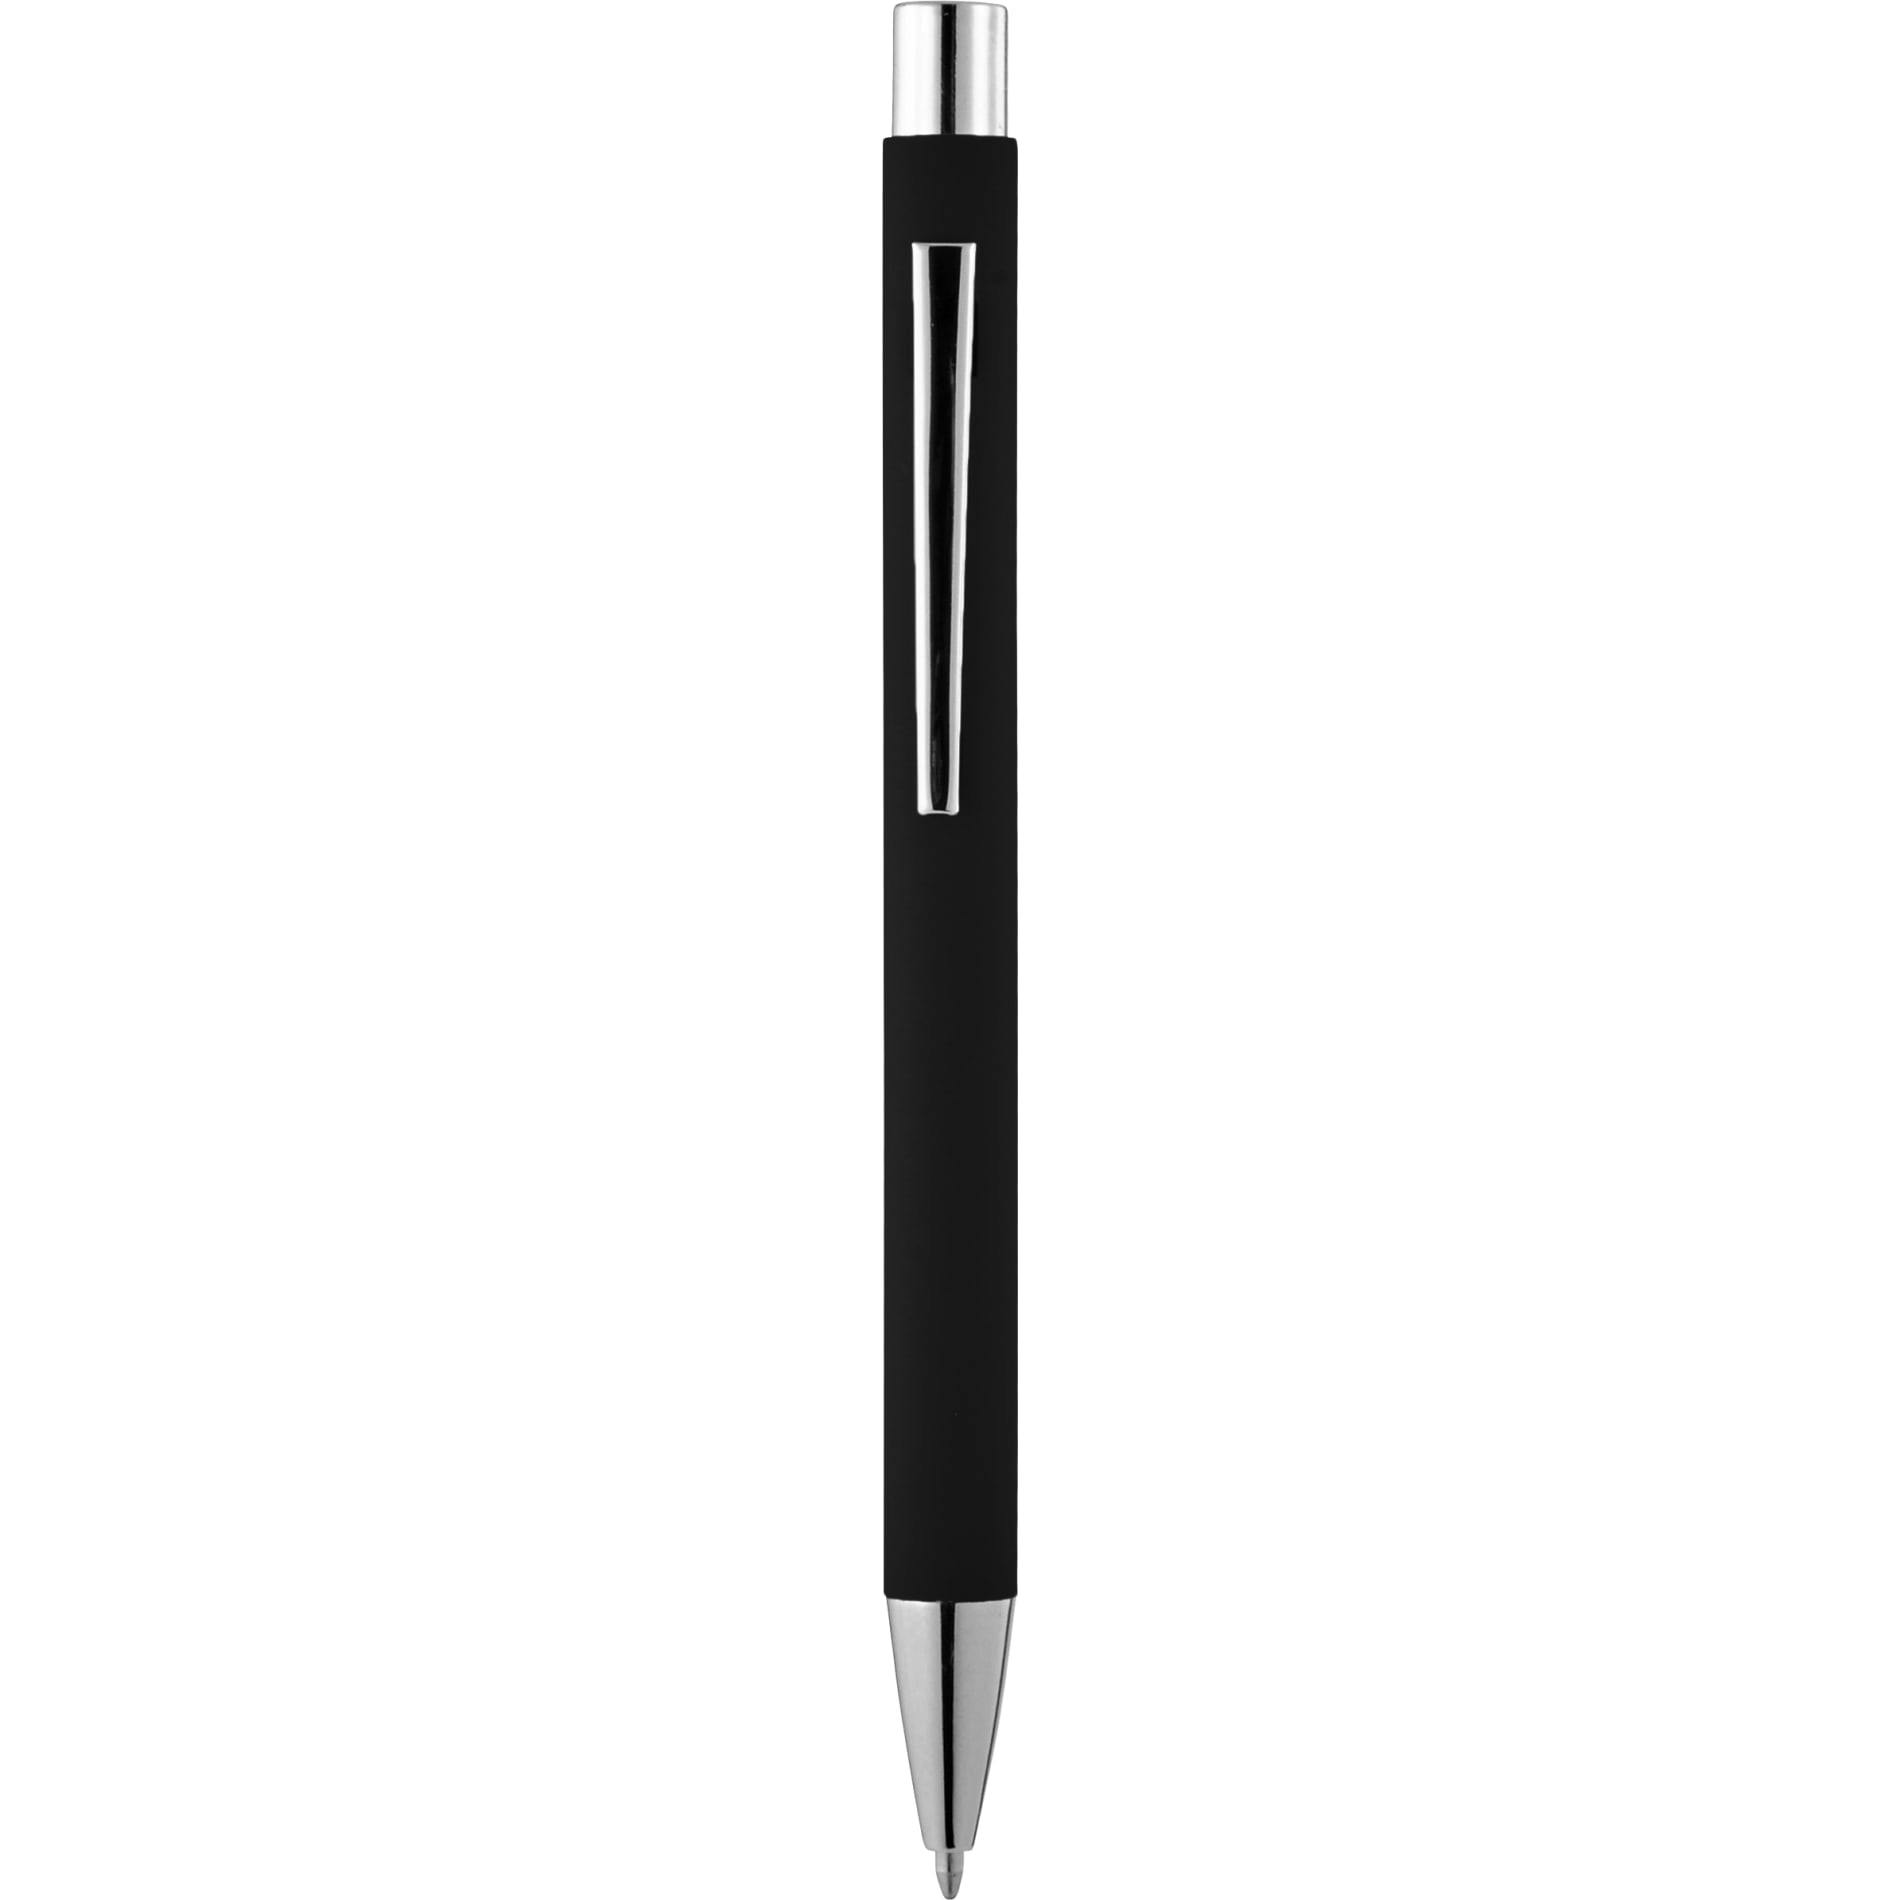 The Maven Soft Touch Metal Pen - additional Image 1